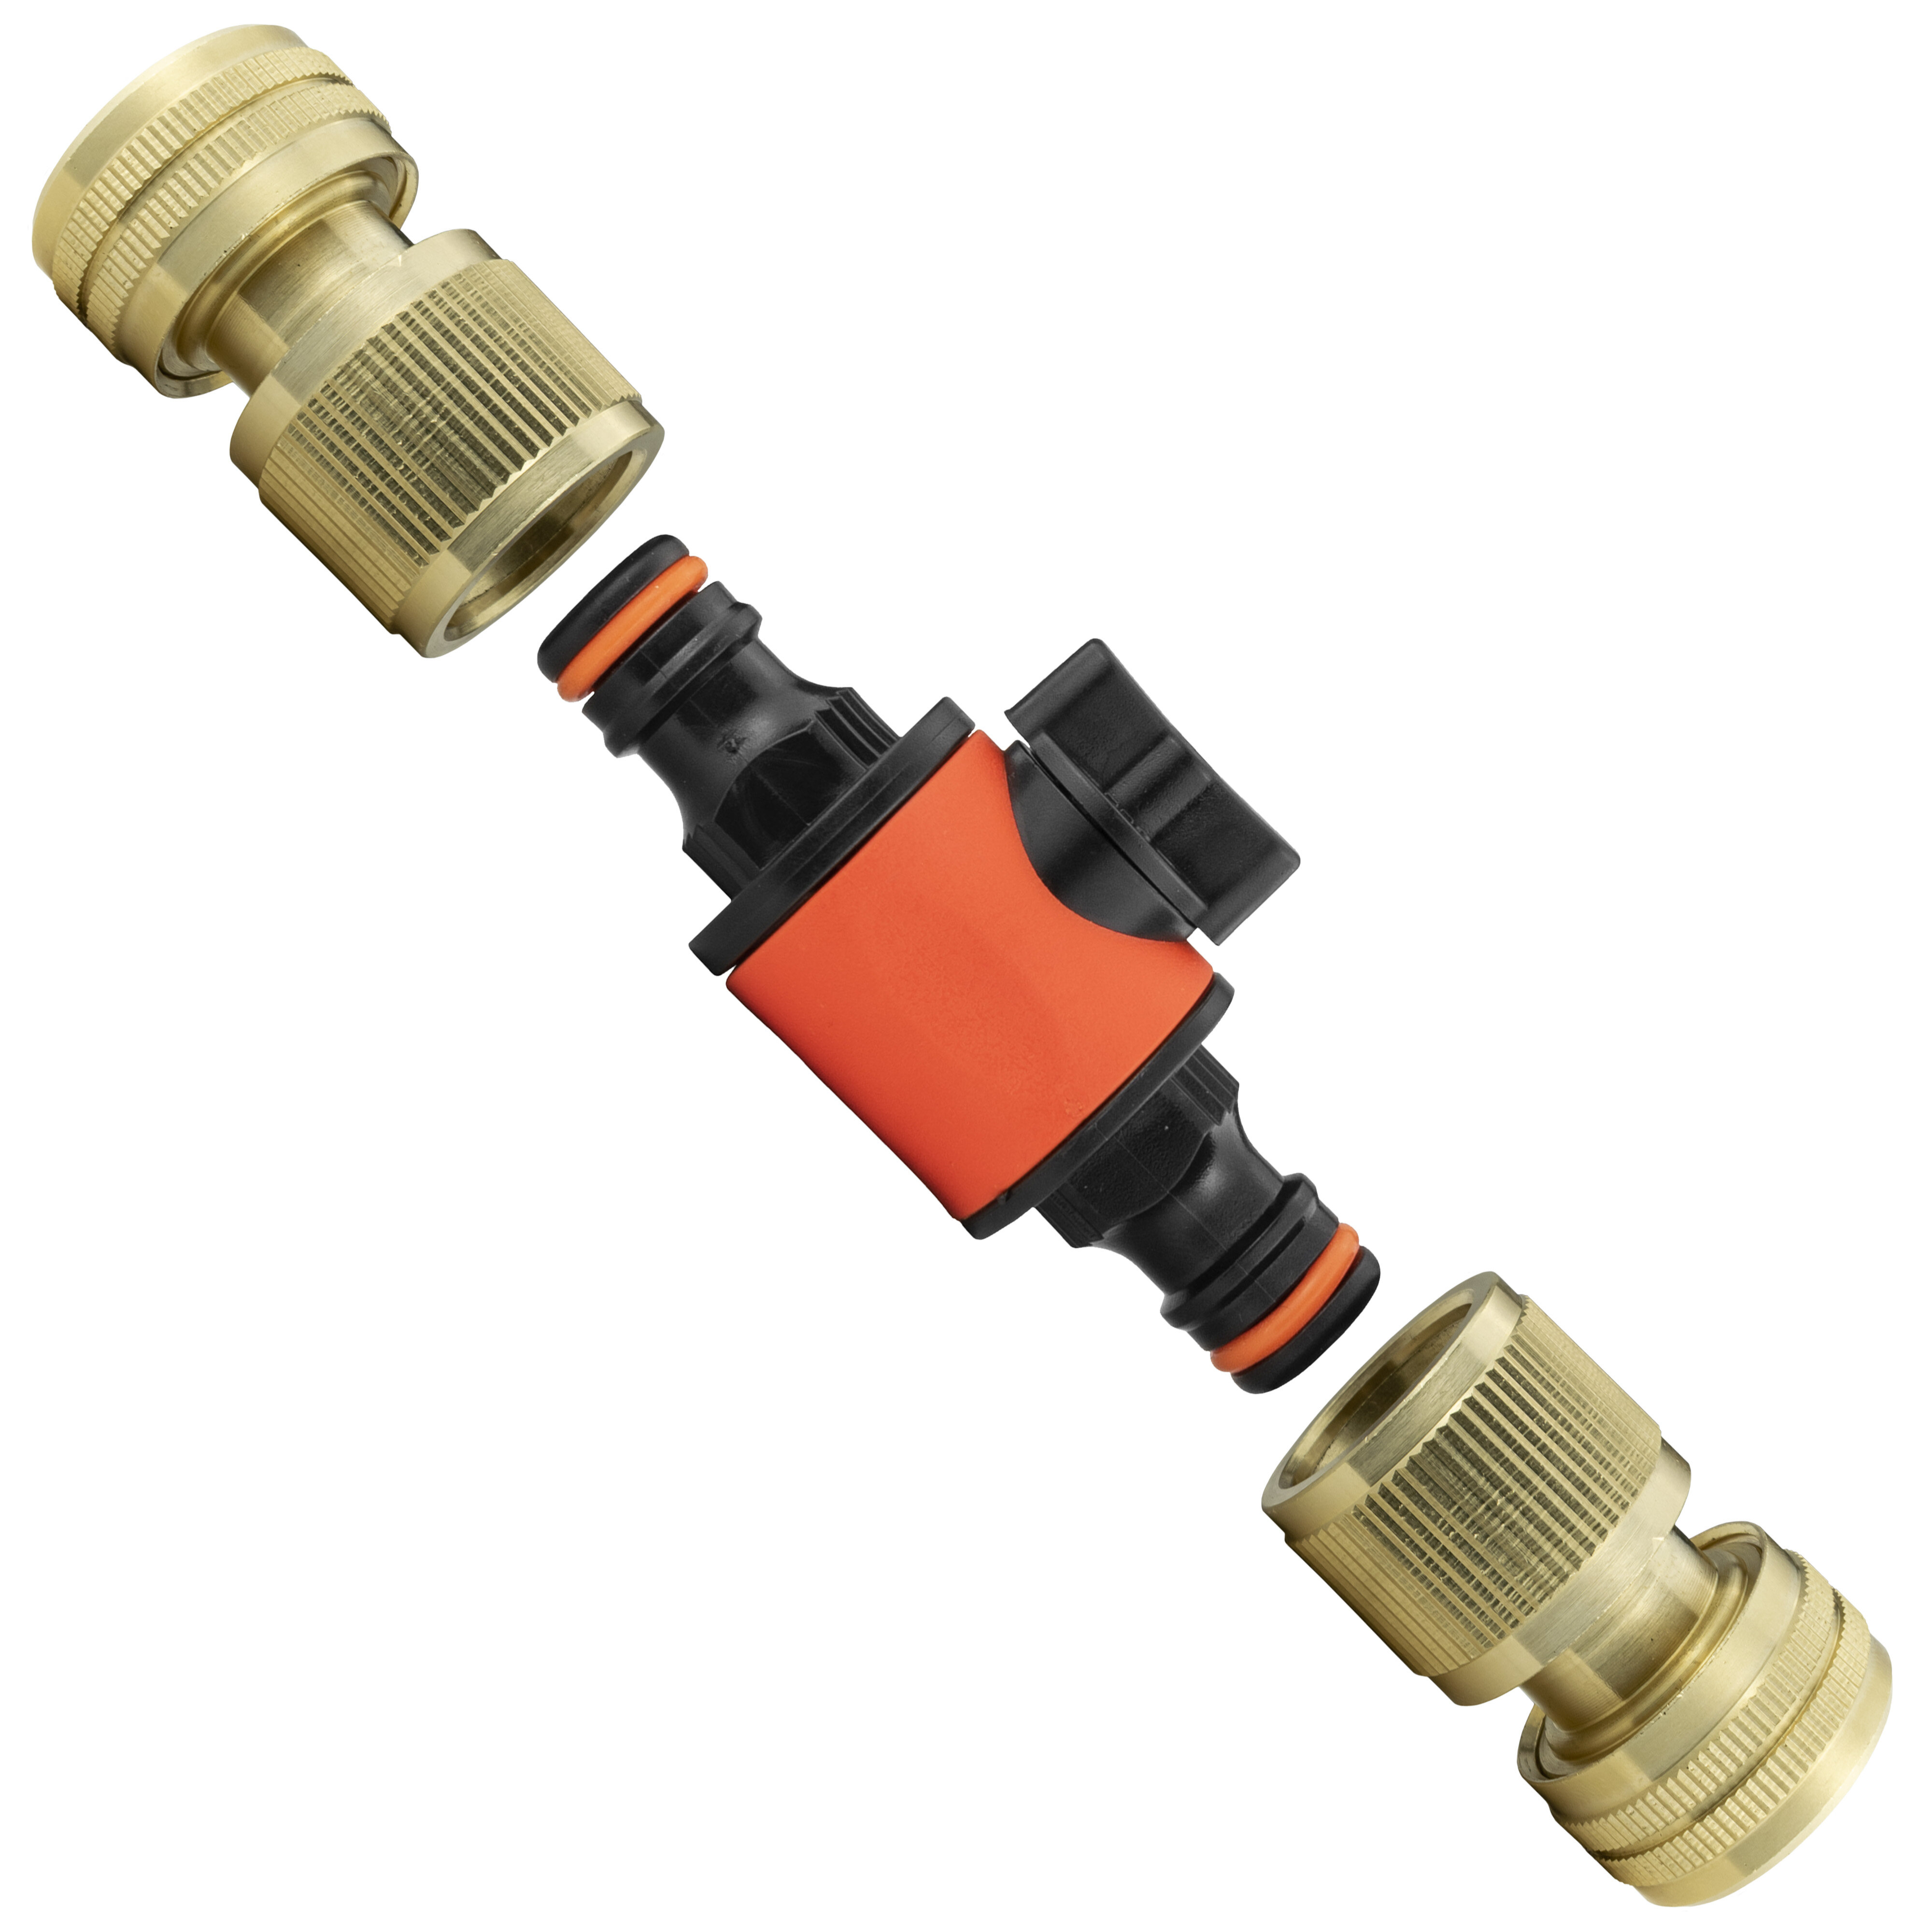 Garden hose in-line flow valve with brass connectors for 1/2" pipe